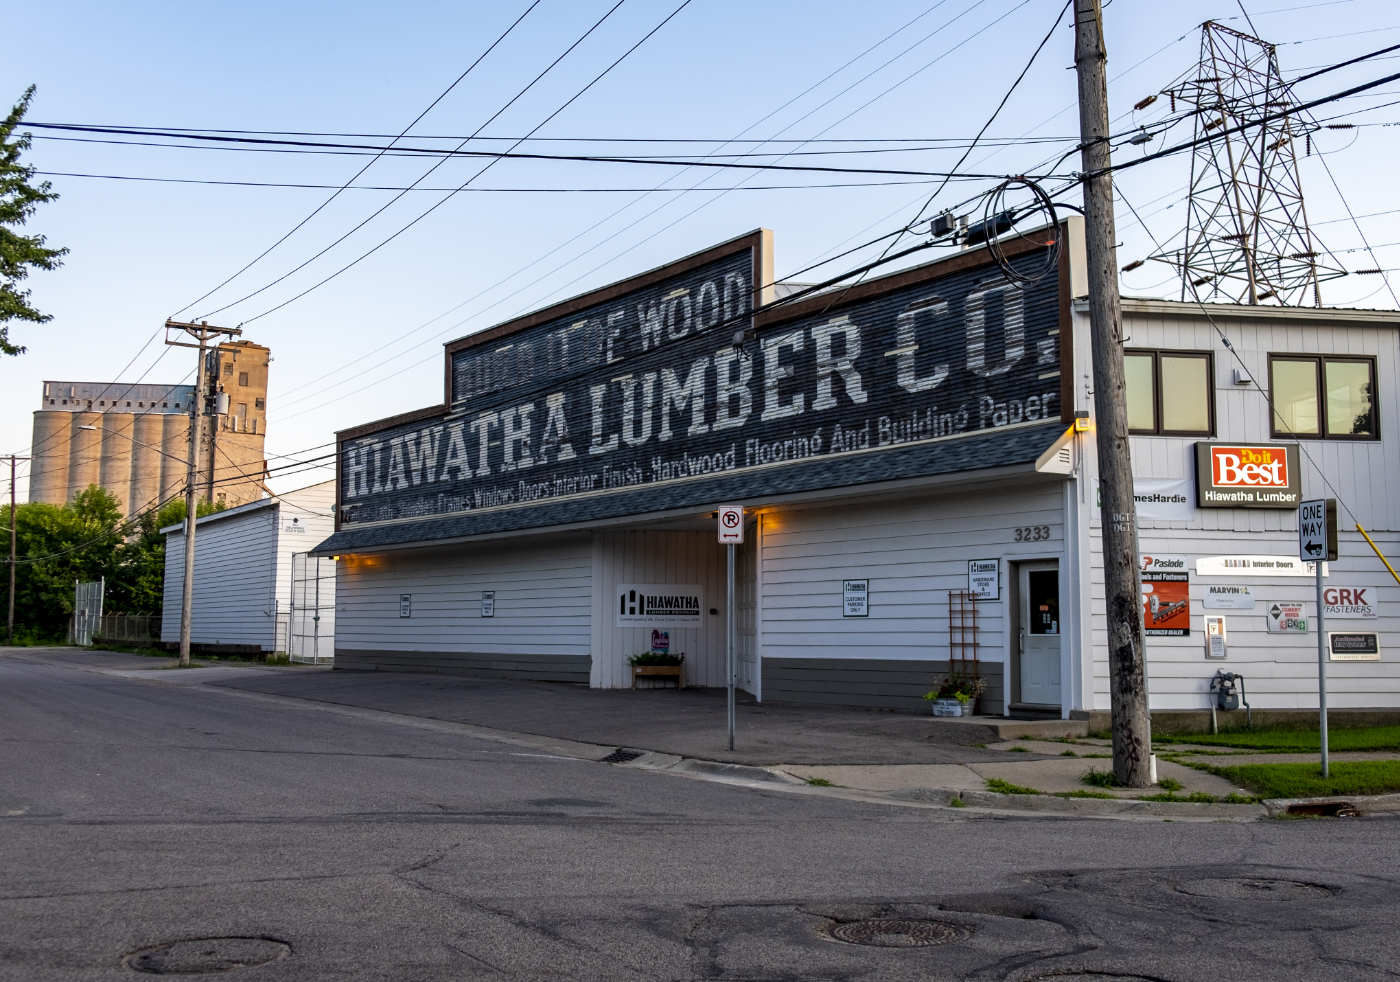 Long single-story white industrial building with large white on dark gray signage across the top reading: HIAWATHA LUMBER CO. with other faded lettering